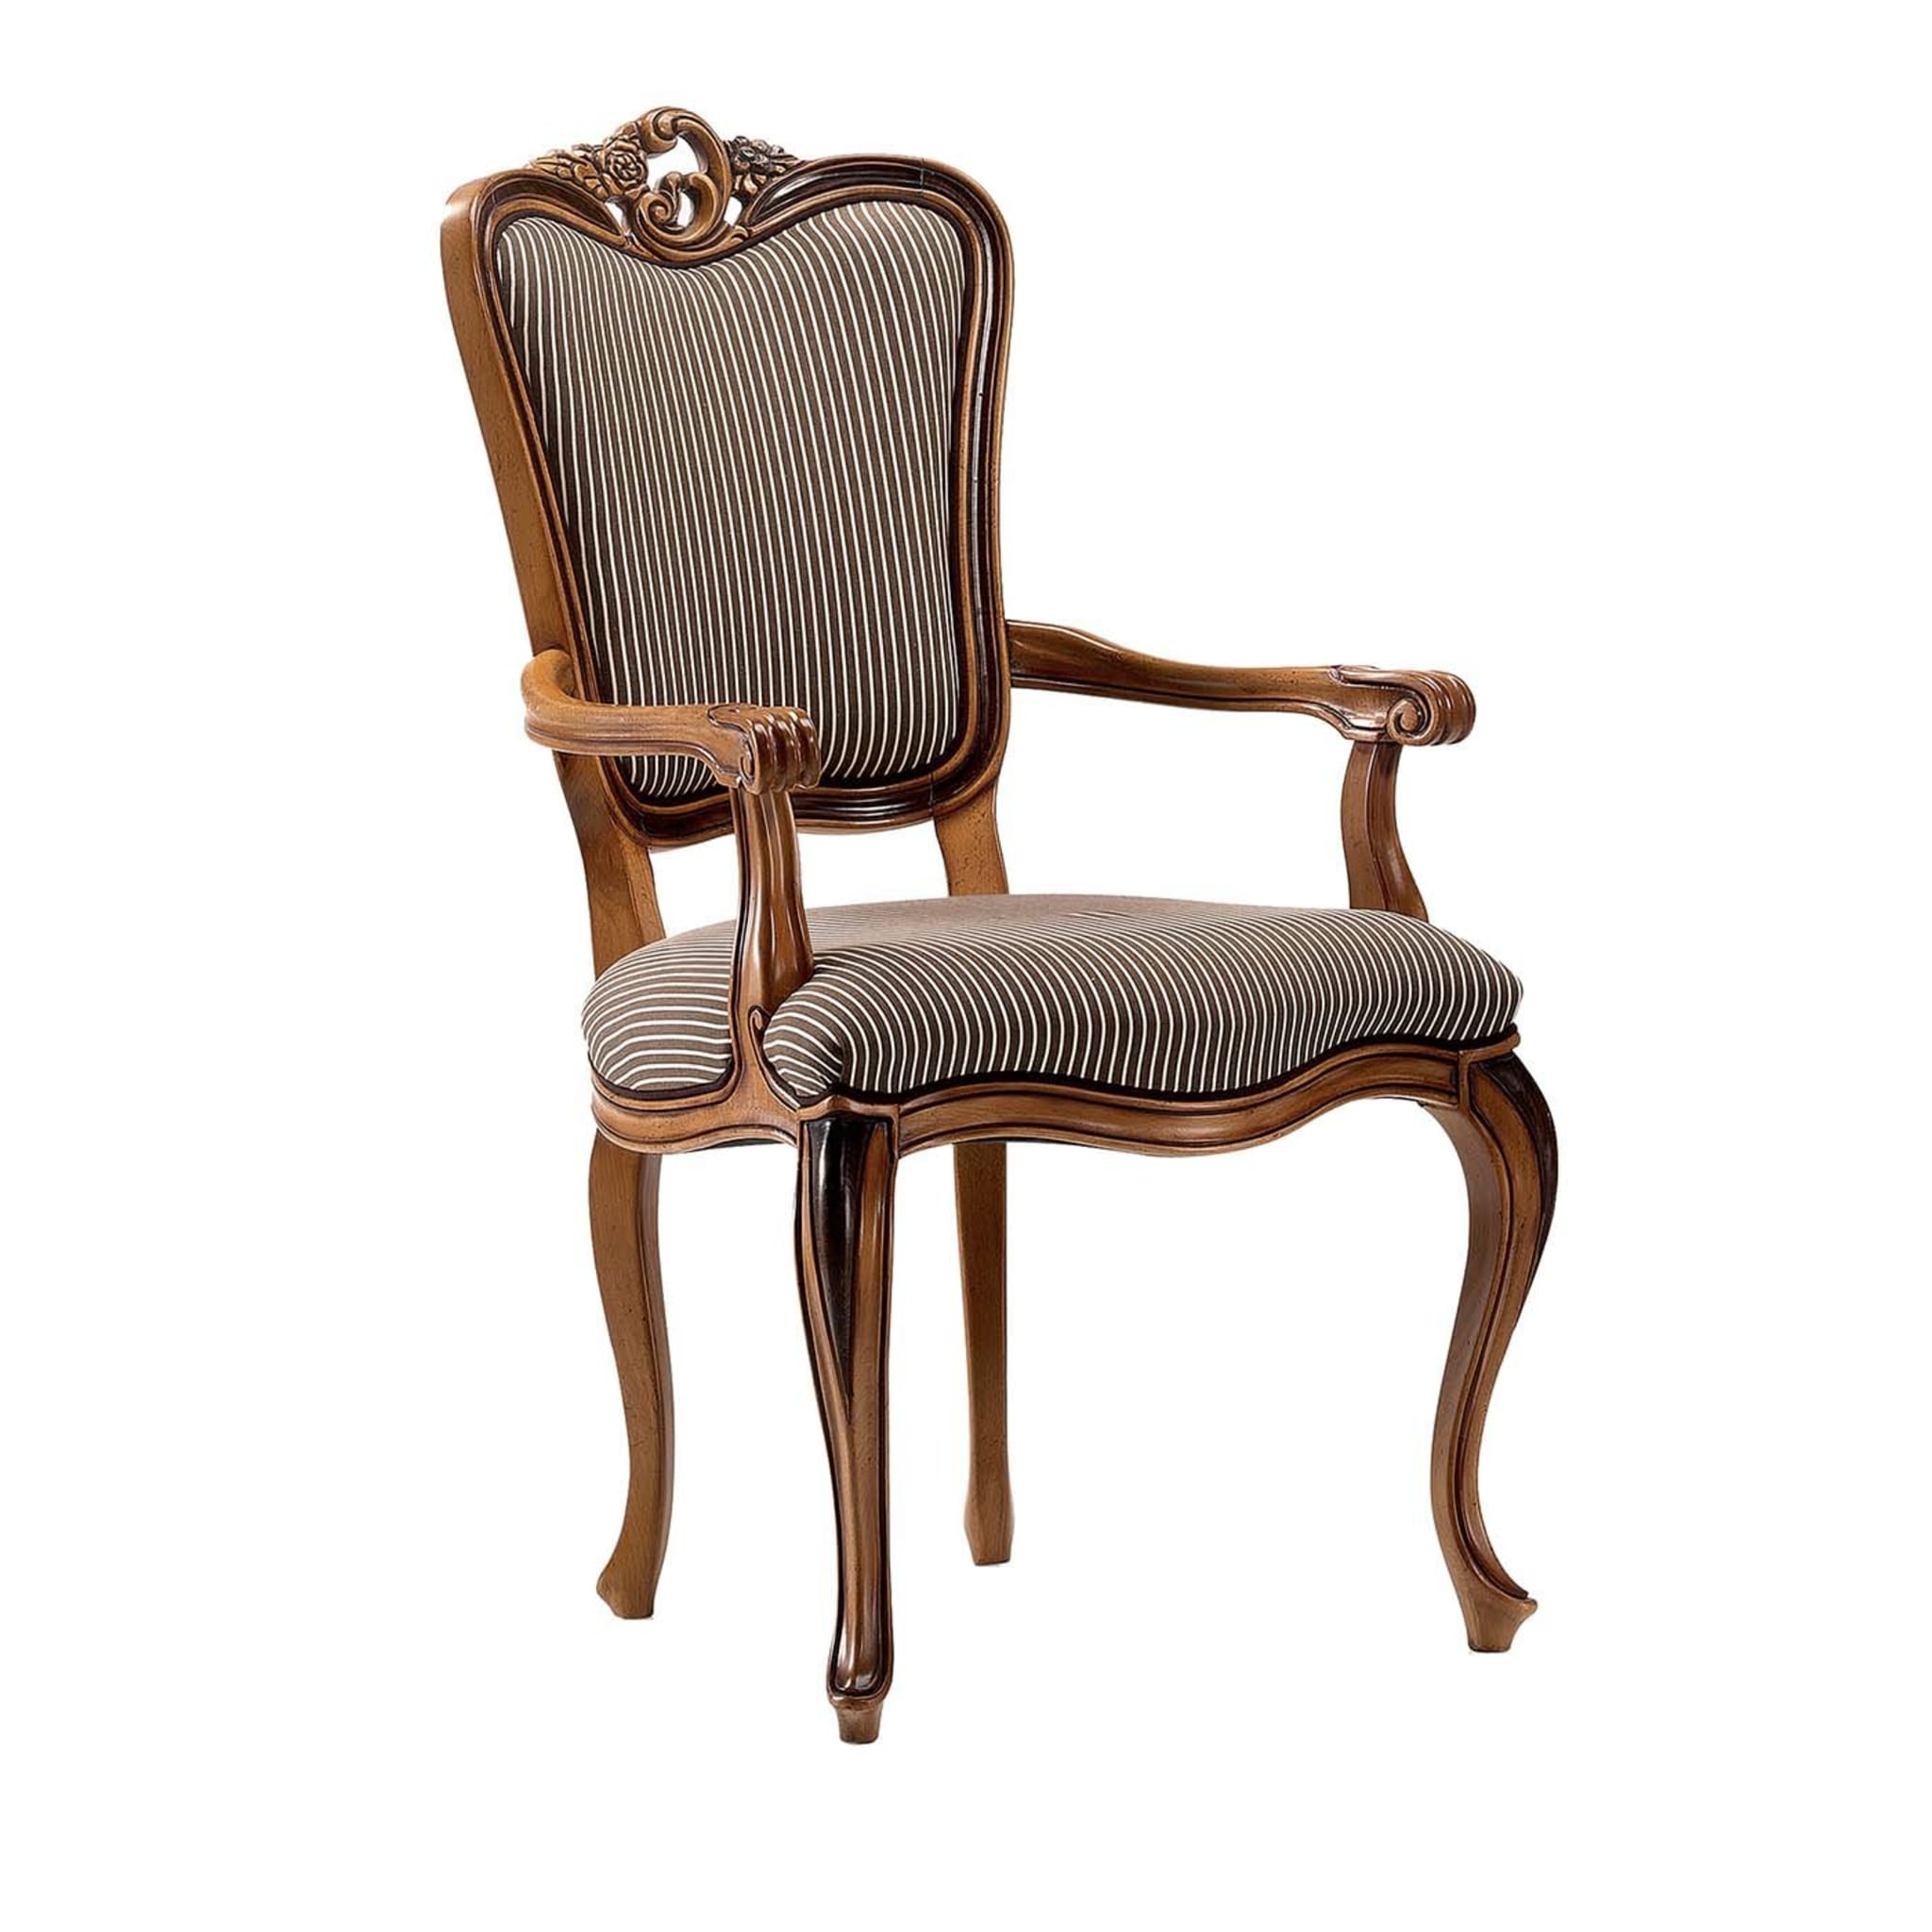 Thin-Striped Chair with Armrests - Main view